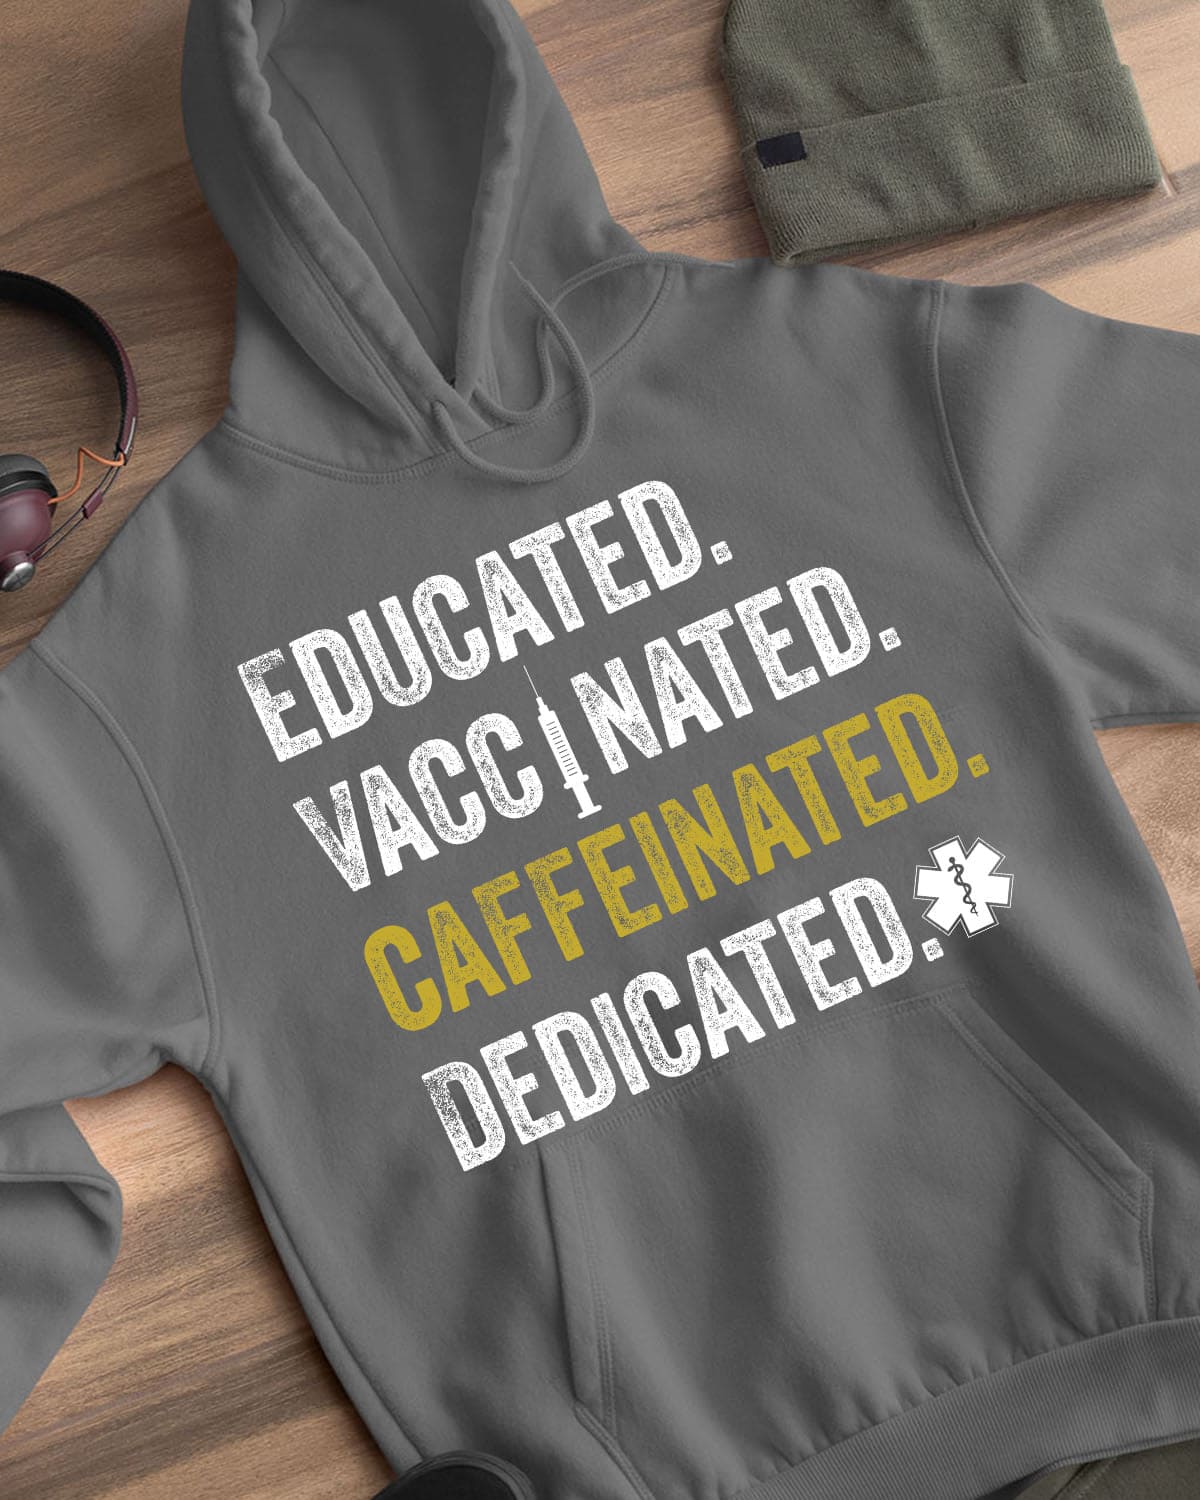 Educated vaccinated caffeinated dedicated